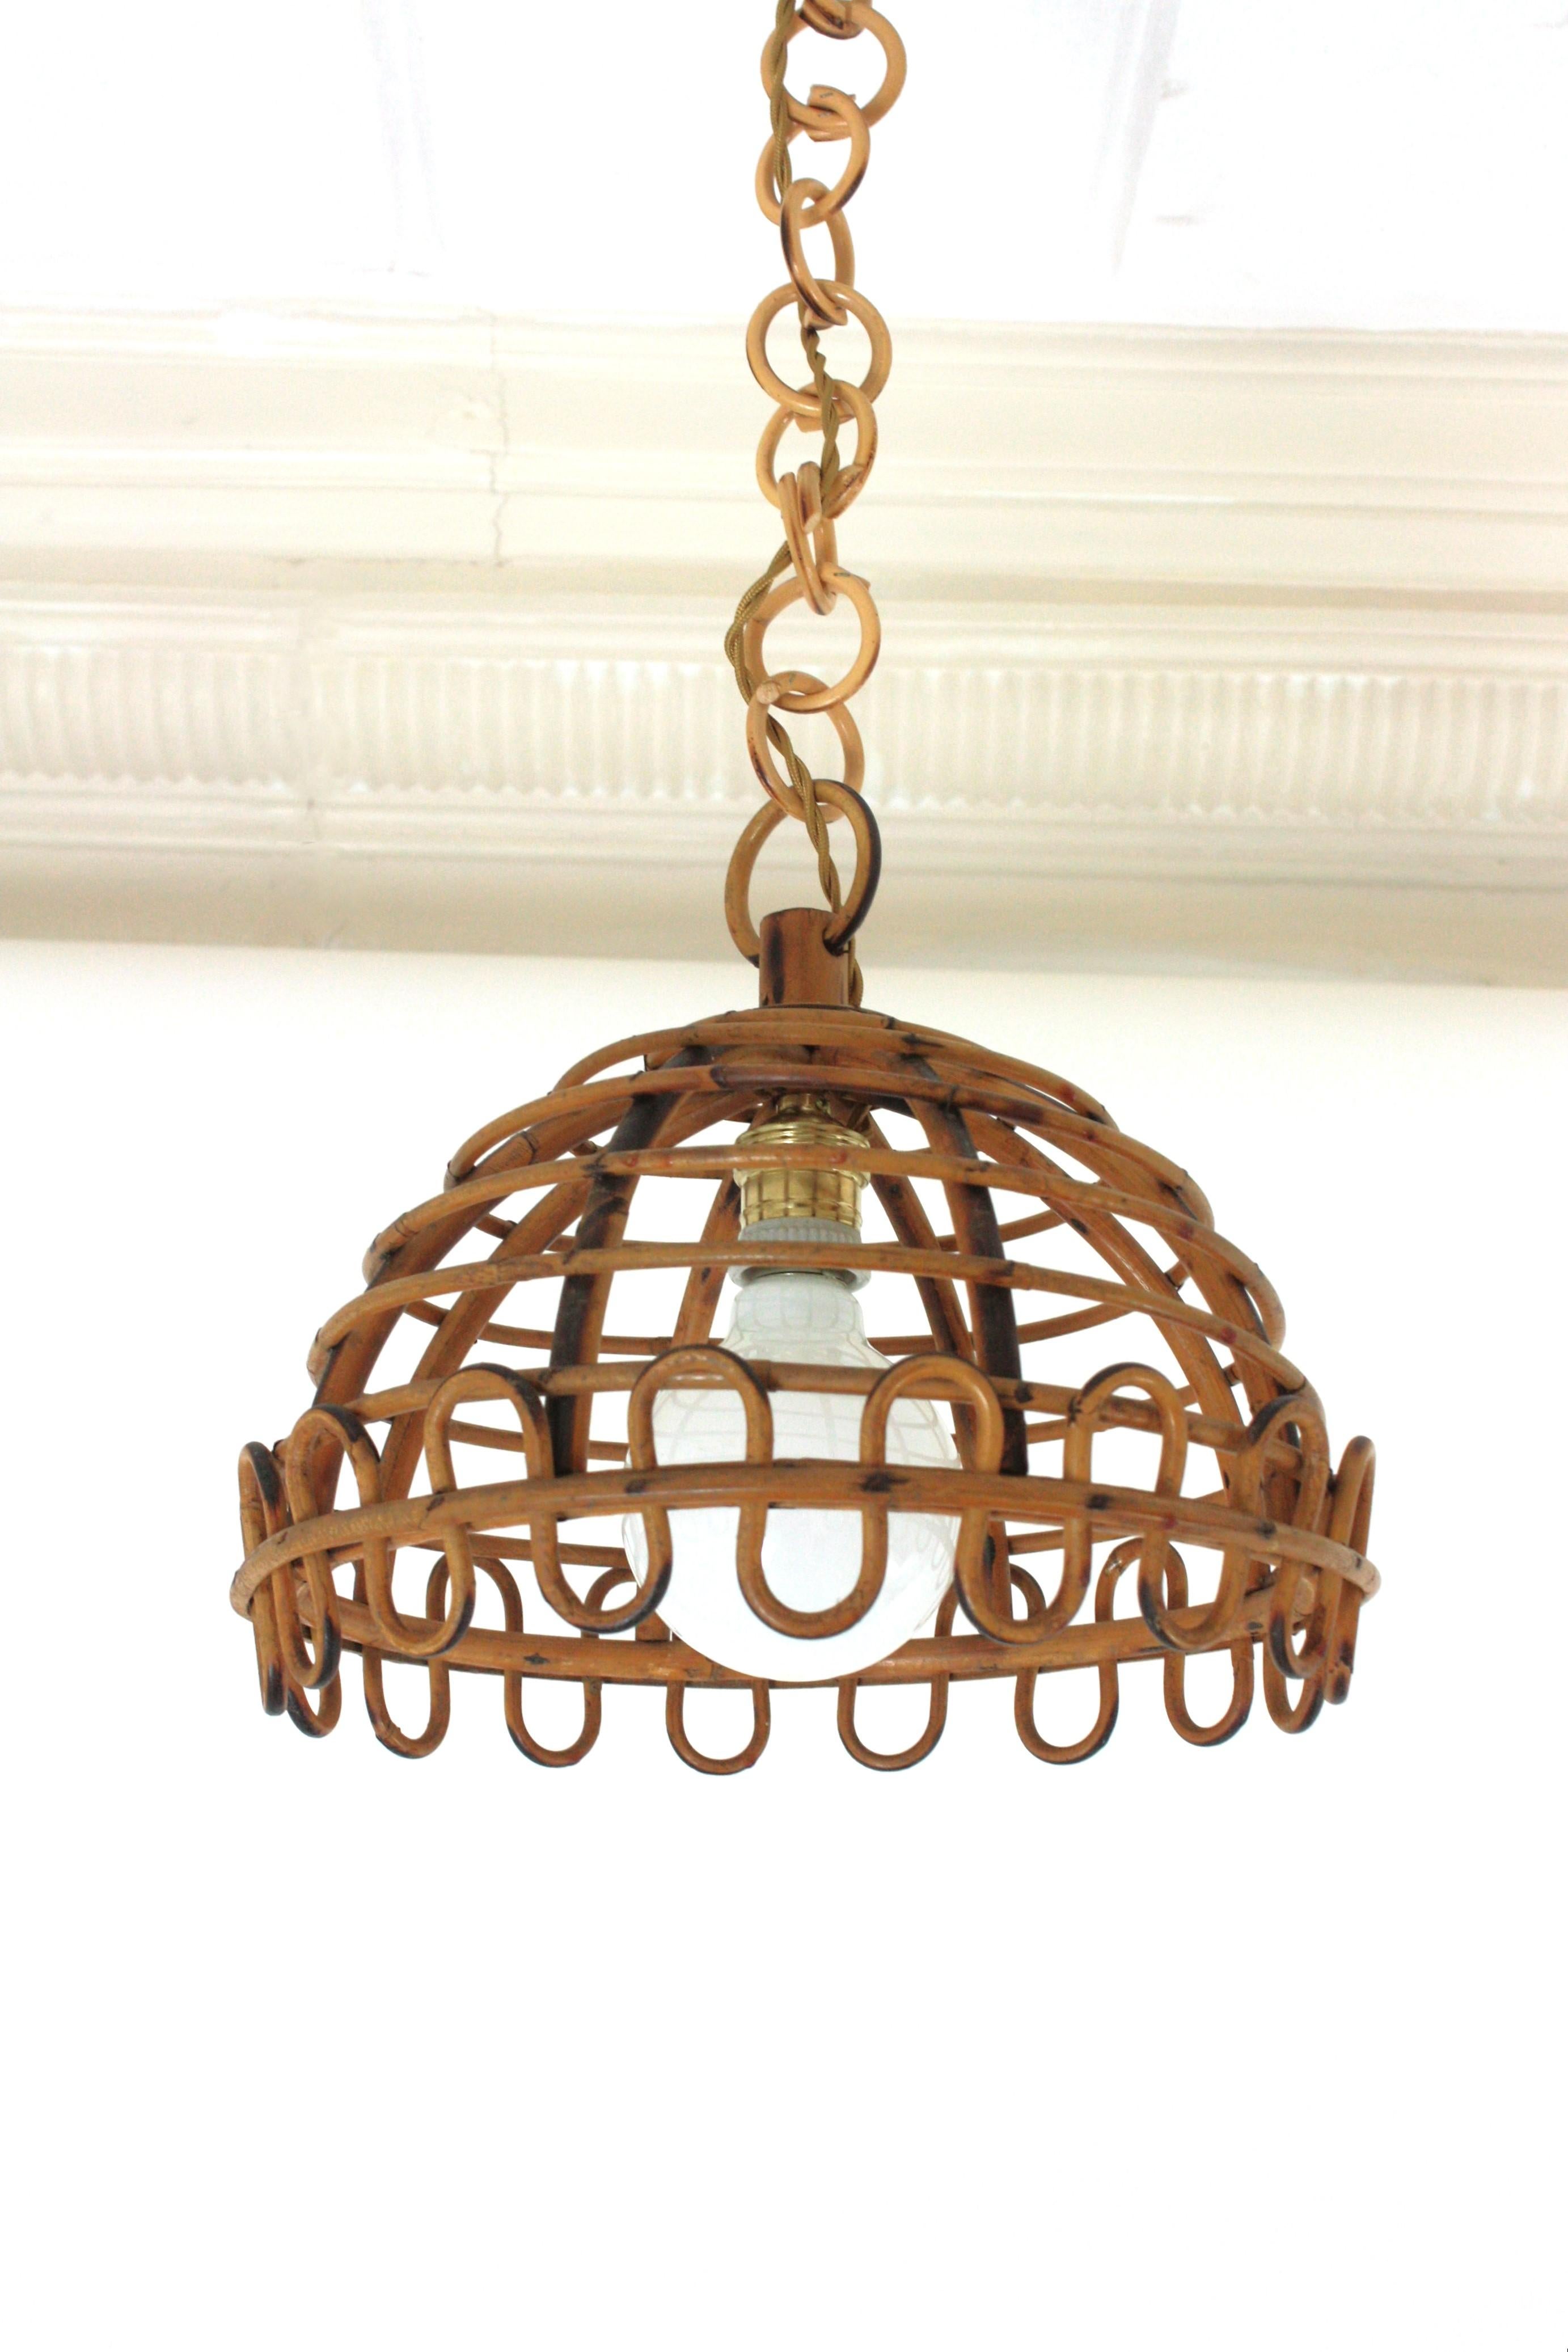 Eye-catching rattan pendant lamp with reminiscenses of the Franco Albini rattan mirrors design.
The Dome shaped lampshade has horizontal rattan canes and undulate ending bottom. The lampshed hangs from a chain made of rattan links. On the top it has